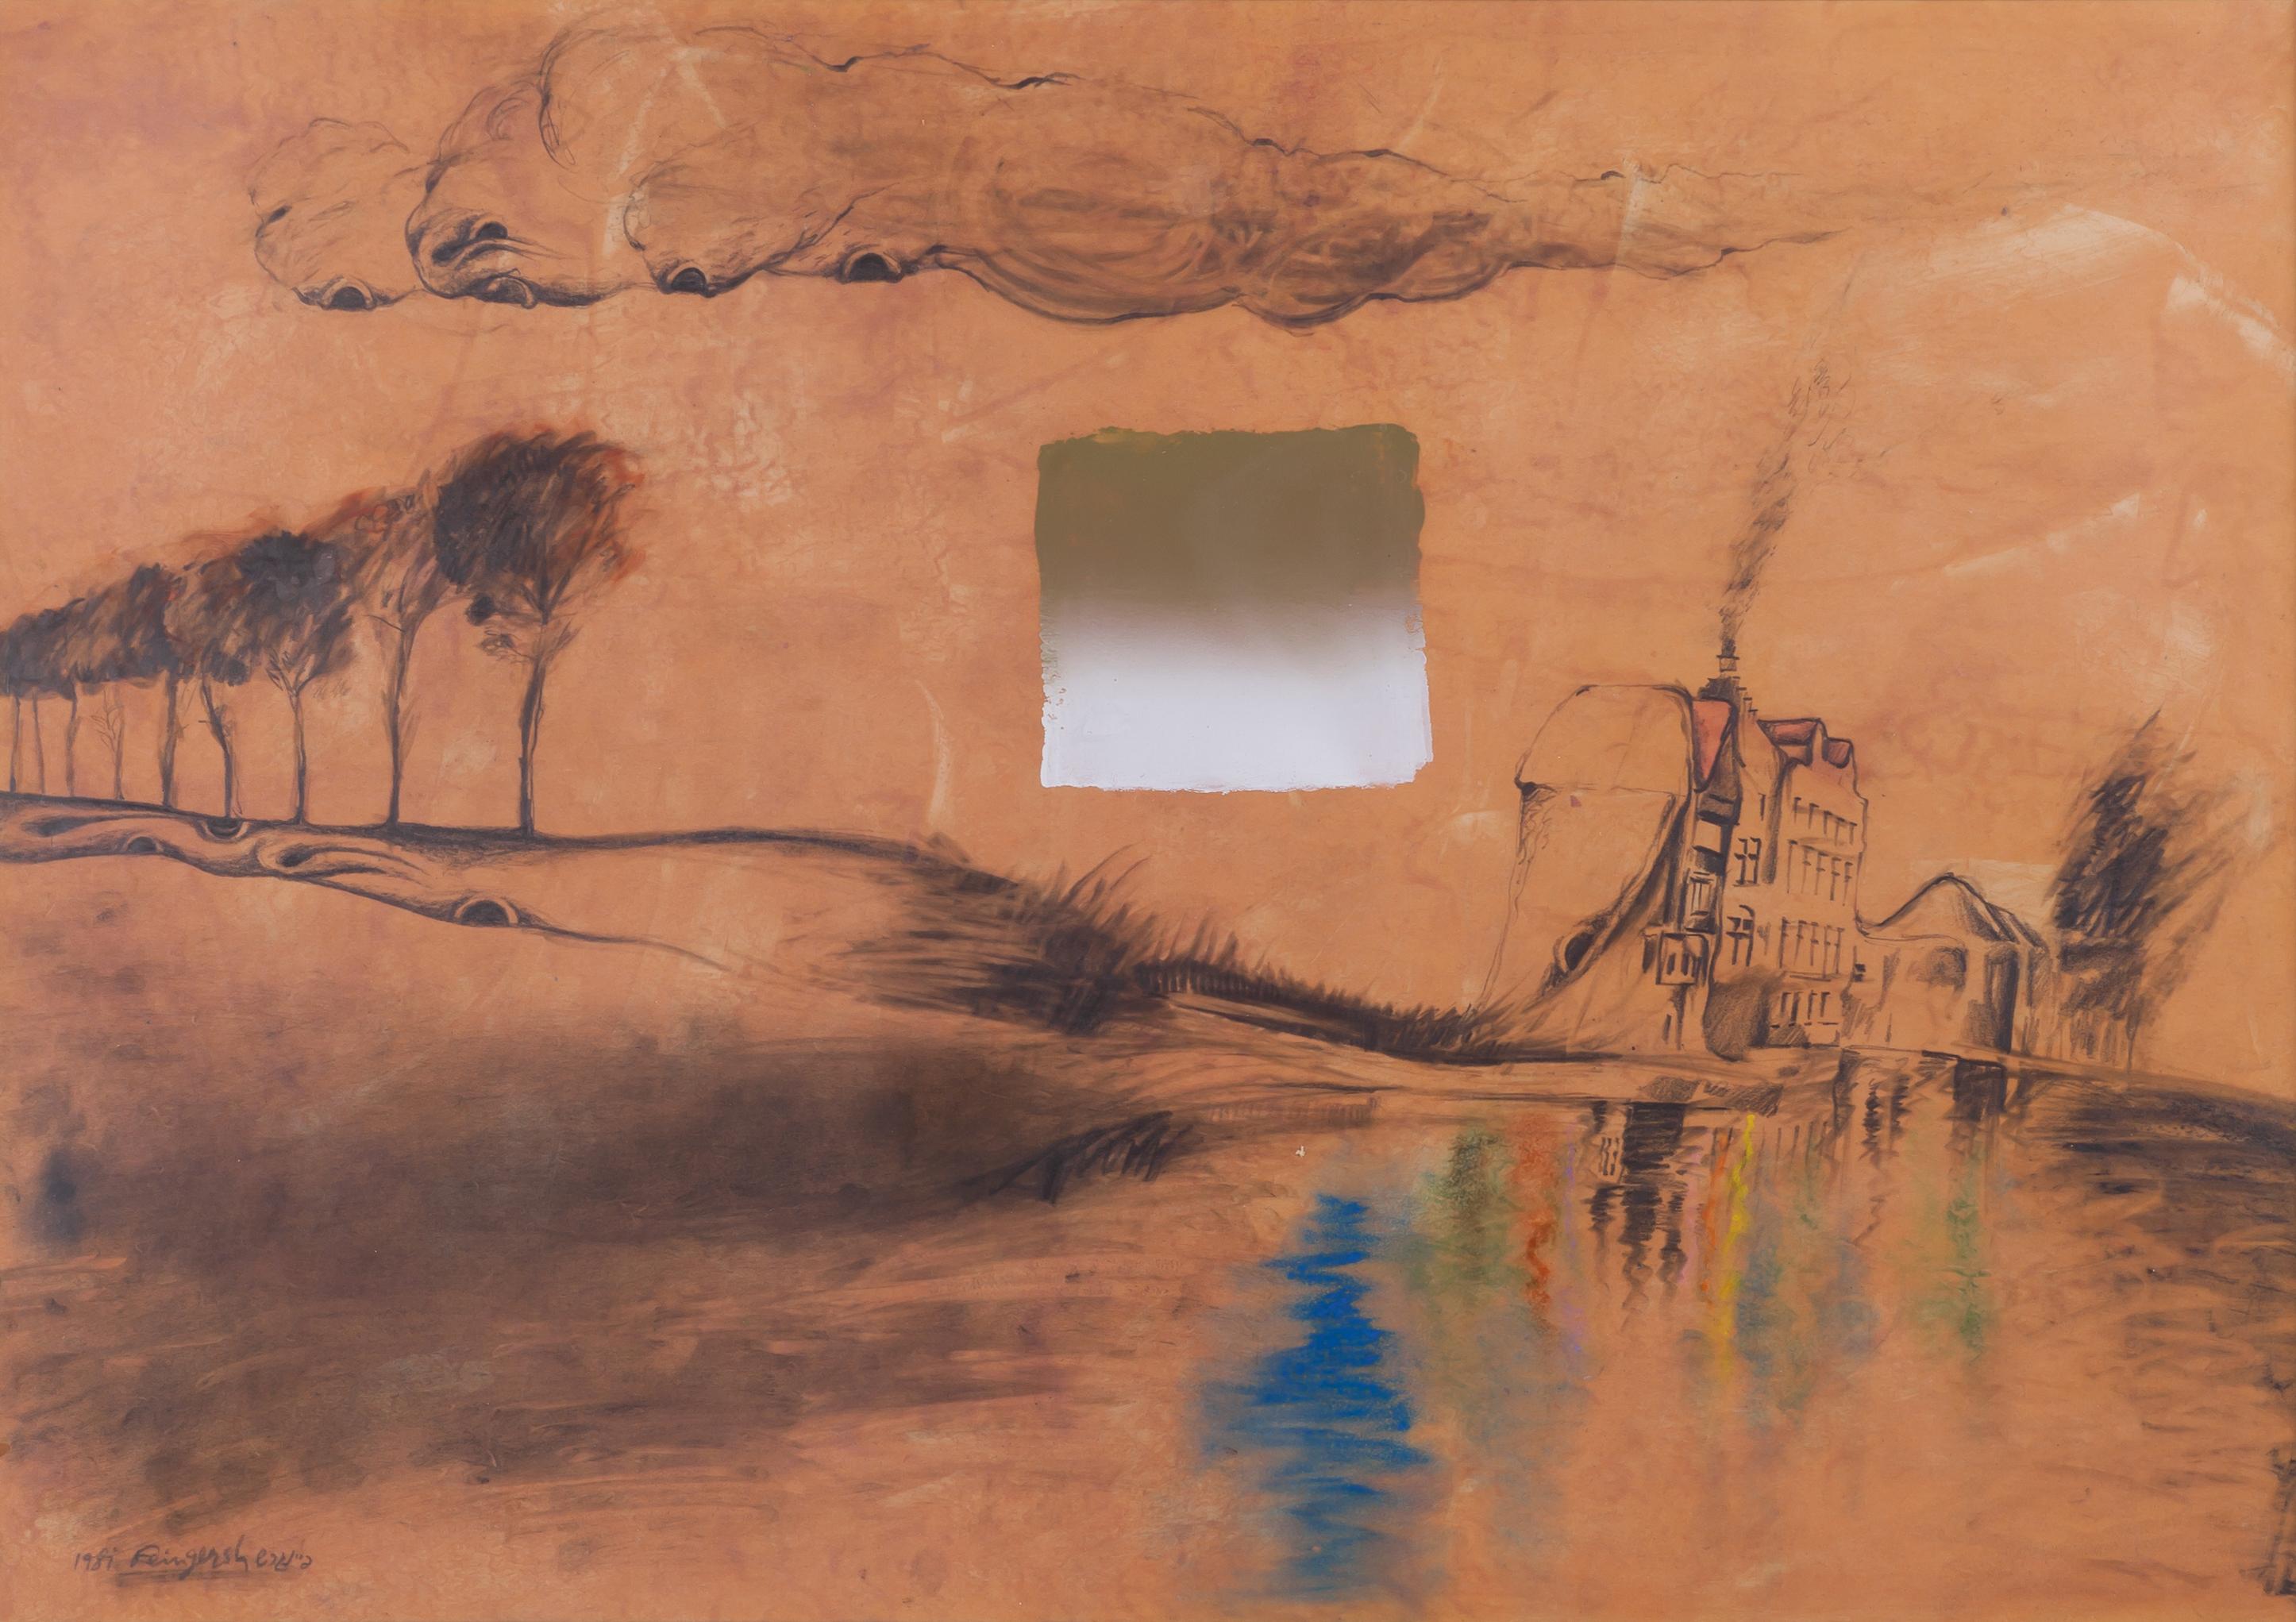 Oded Feingersh Landscape Art - House by the River - Contemporary, Surrealism, Mix media, Late 20th Century